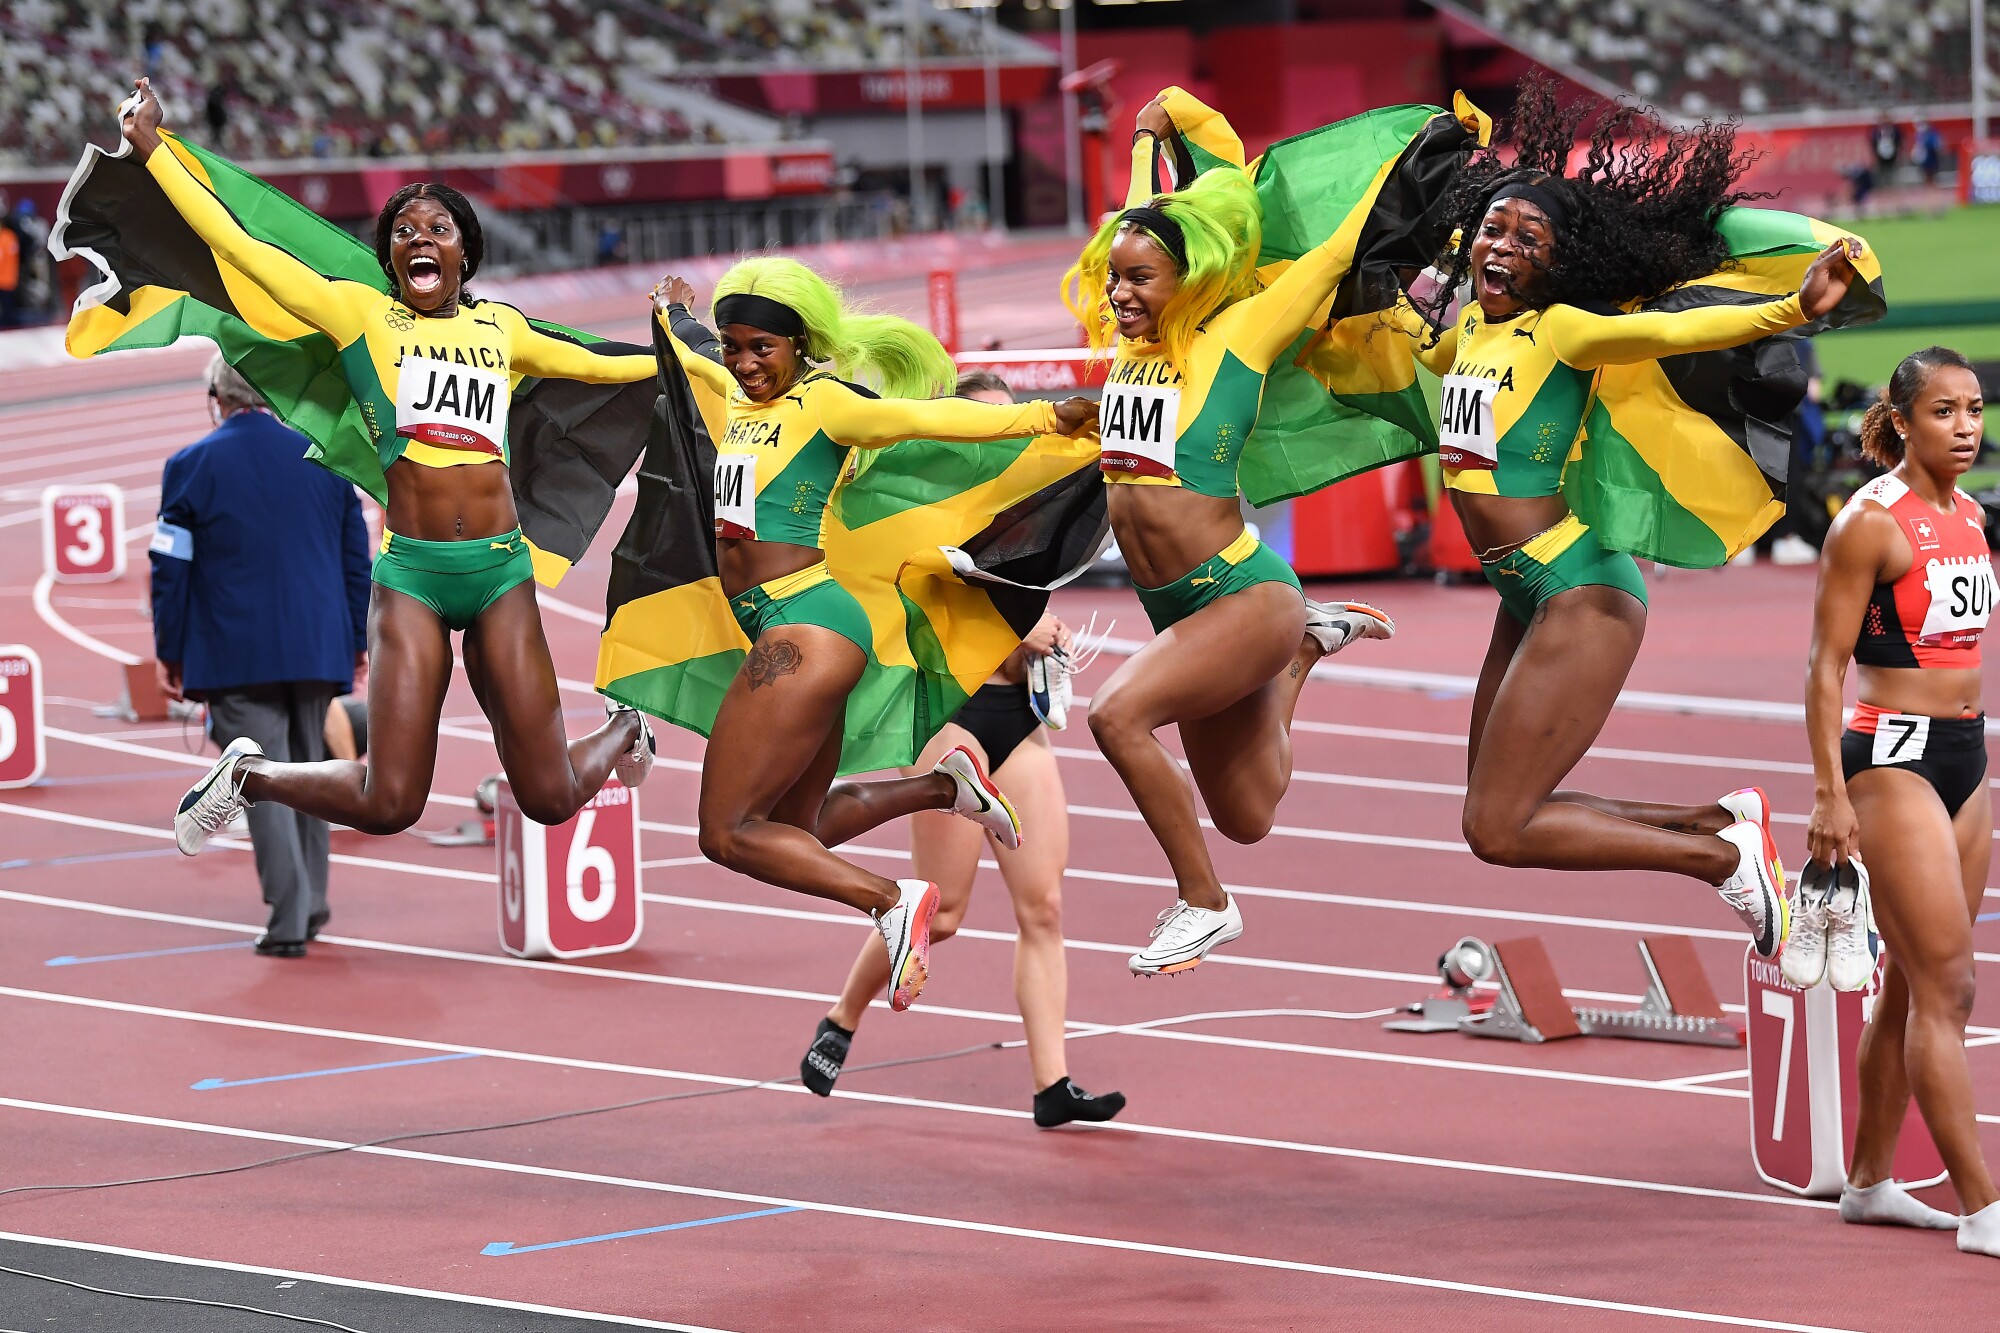 The Jamaica women's 4 X100 team leaps into the air in celebration